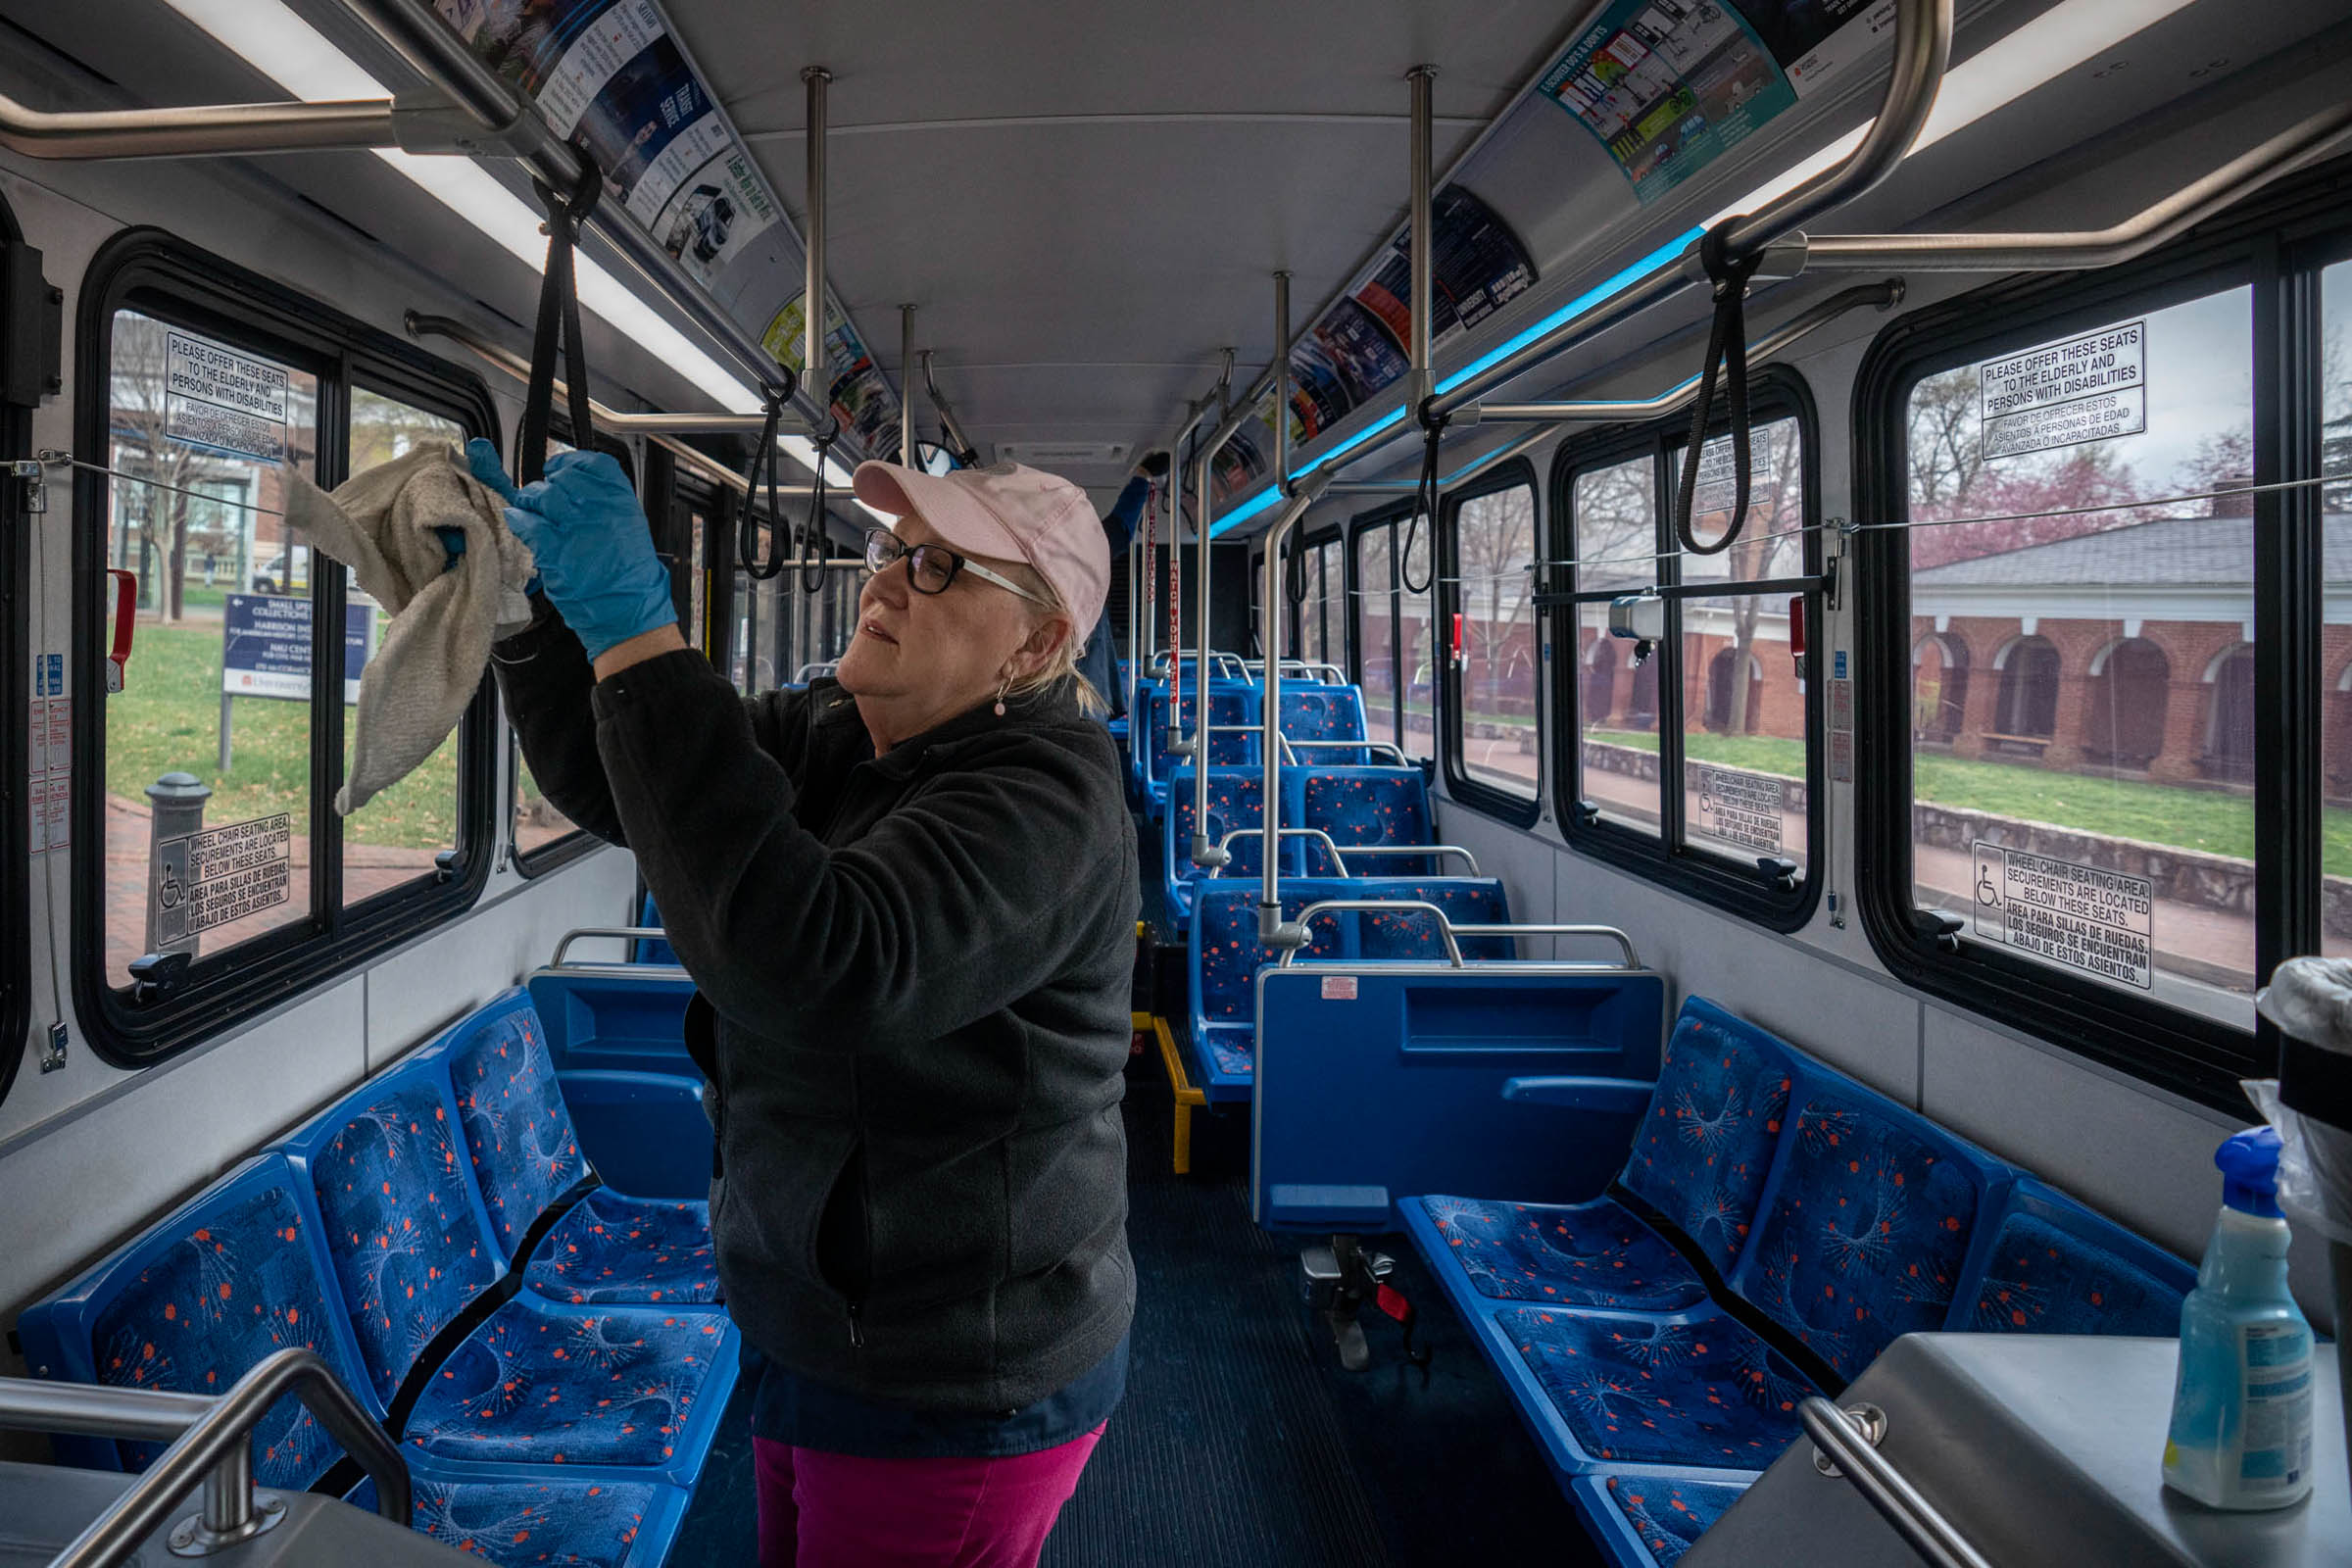 UVA transportation staff member wiping down handles on a bus with disinfectant